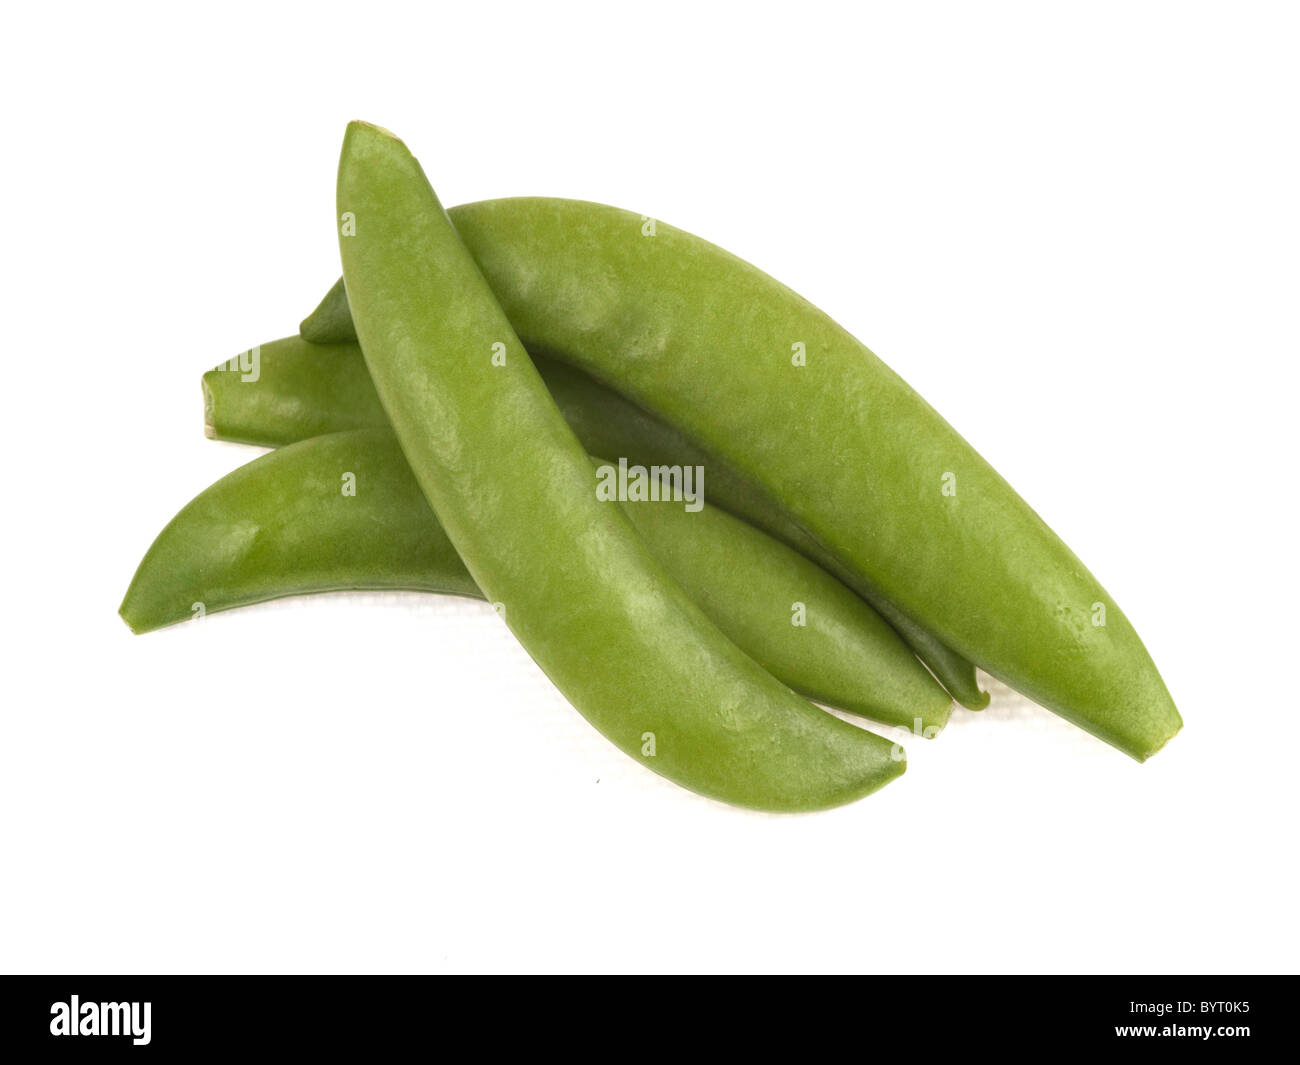 Fresh Ripe Uncooked Raw Garden Green Peas In Pods With No People Against A White Background With A Clipping Path Stock Photo